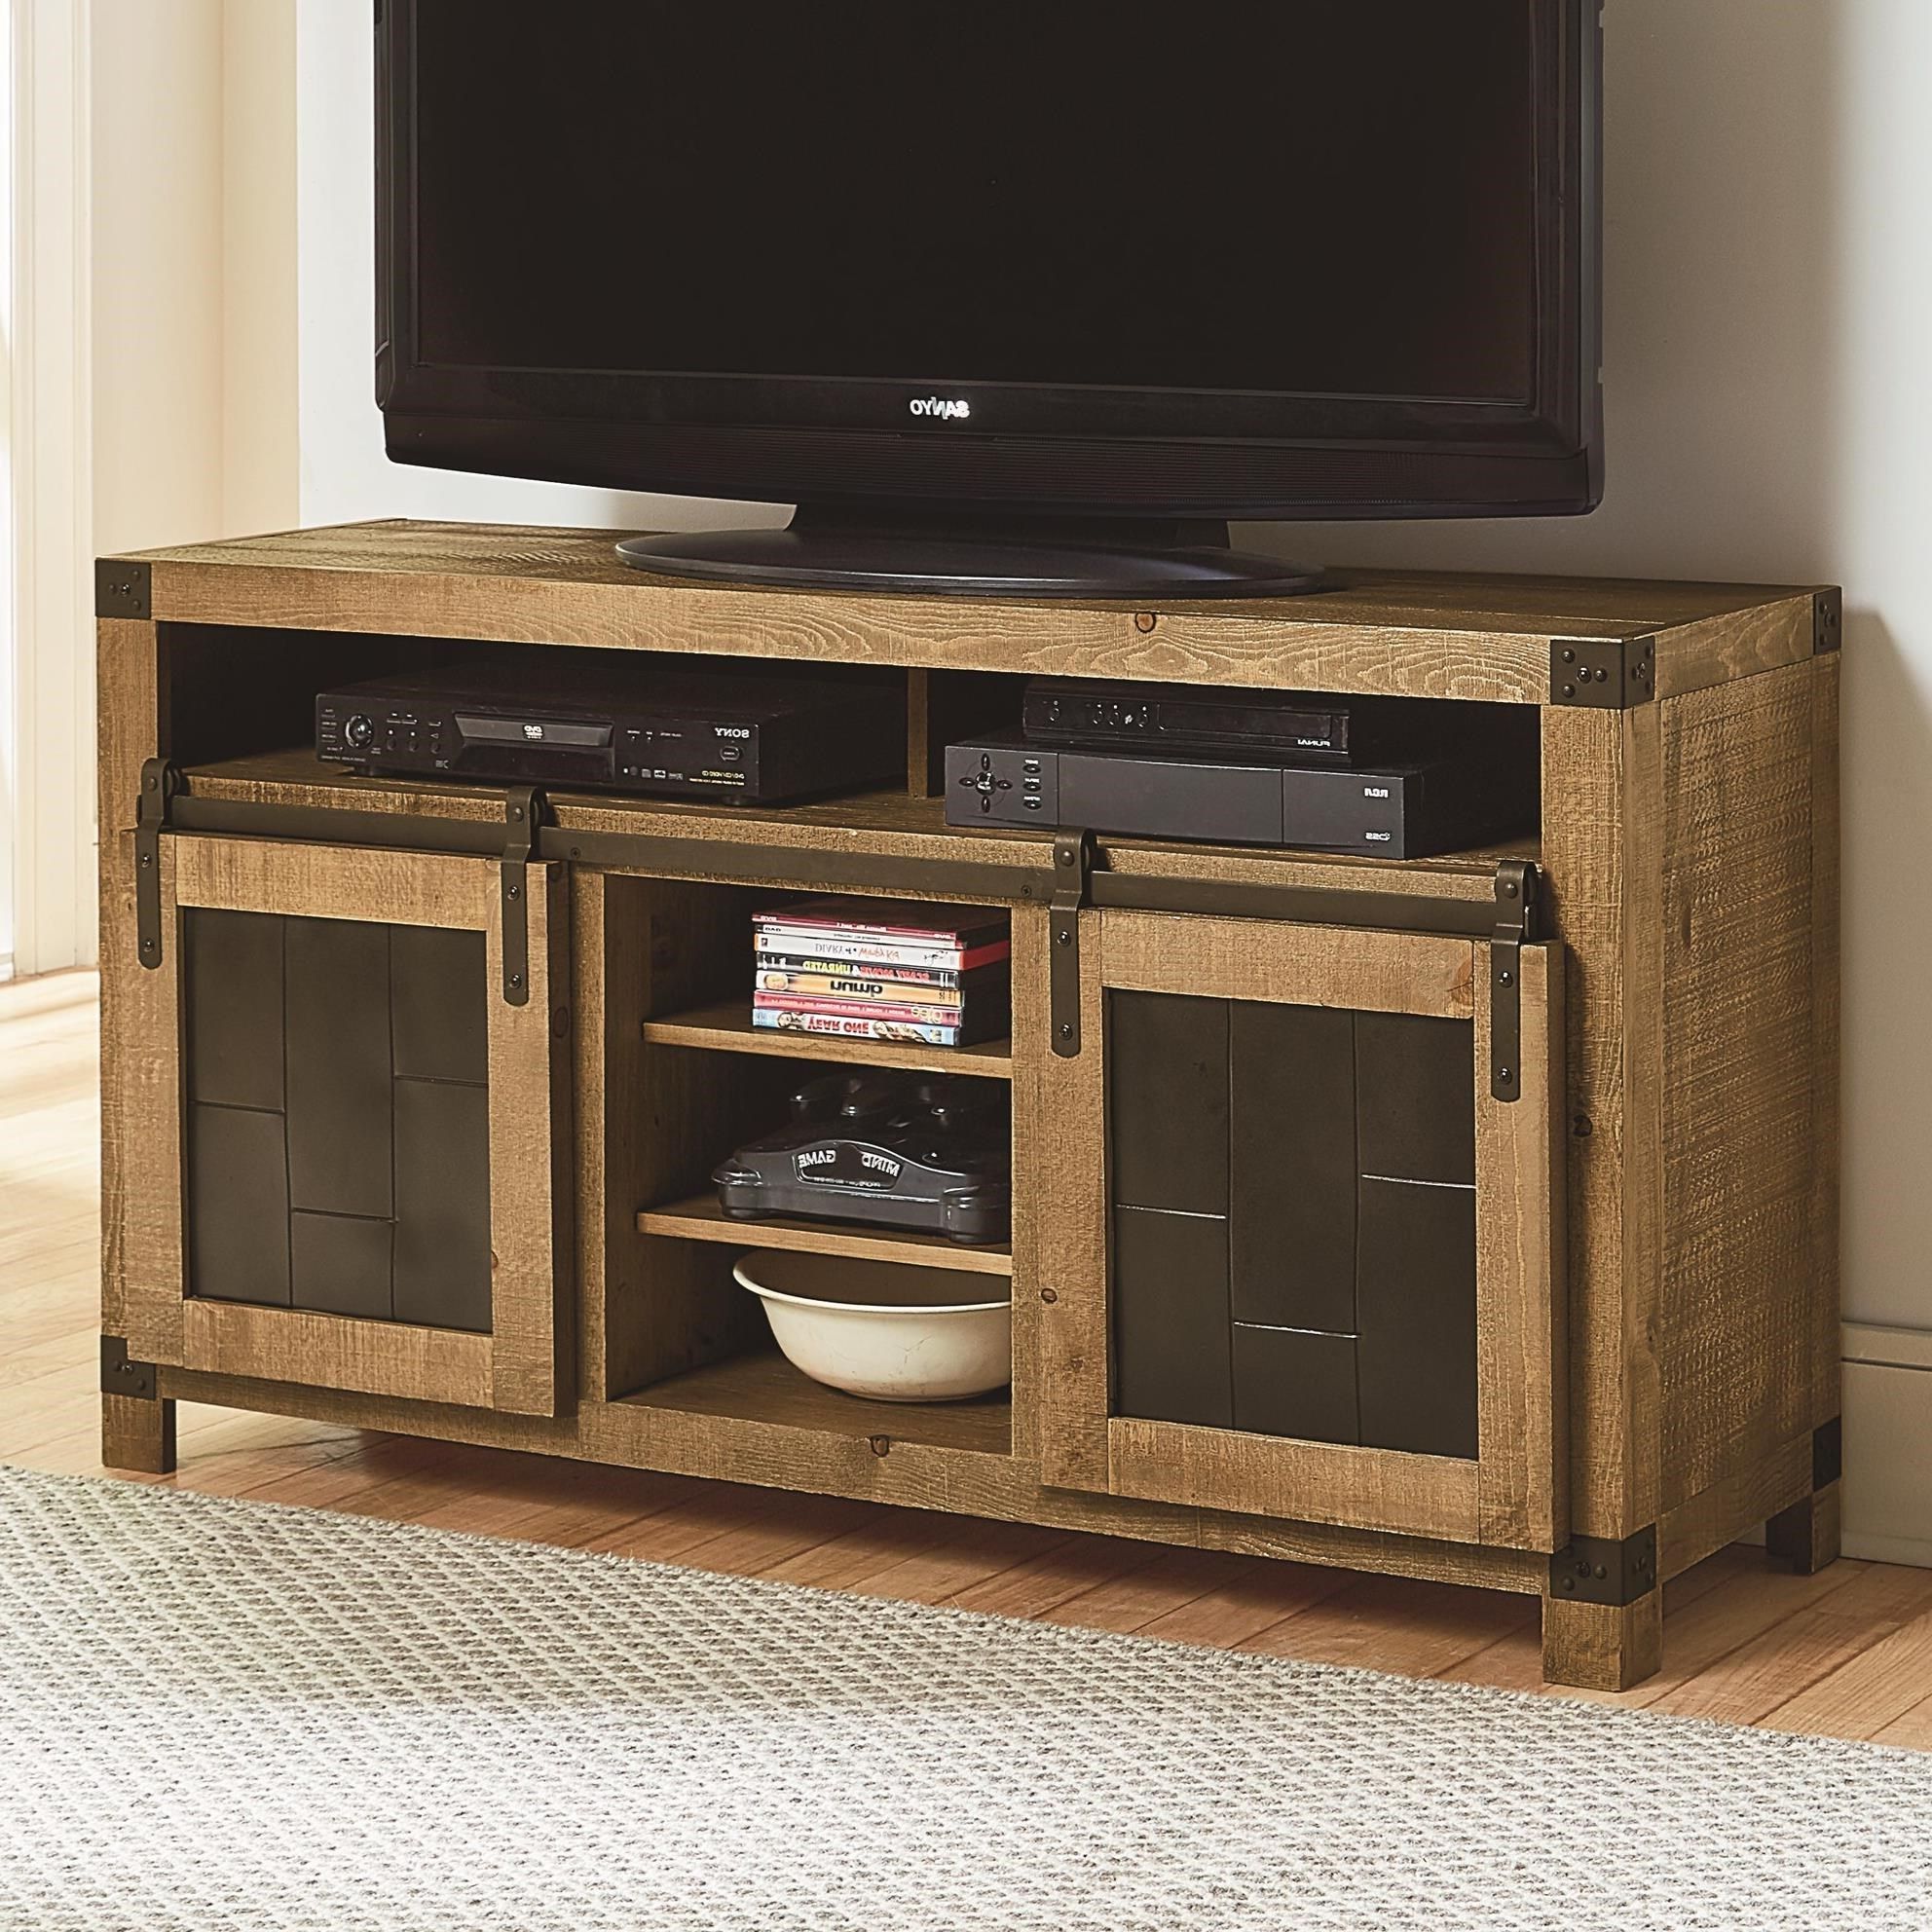 Newest Tv Stands With Sliding Barn Door Console In Rustic Oak With Progressive Furniture Mojo Rustic 54 Inch Console With (View 2 of 10)